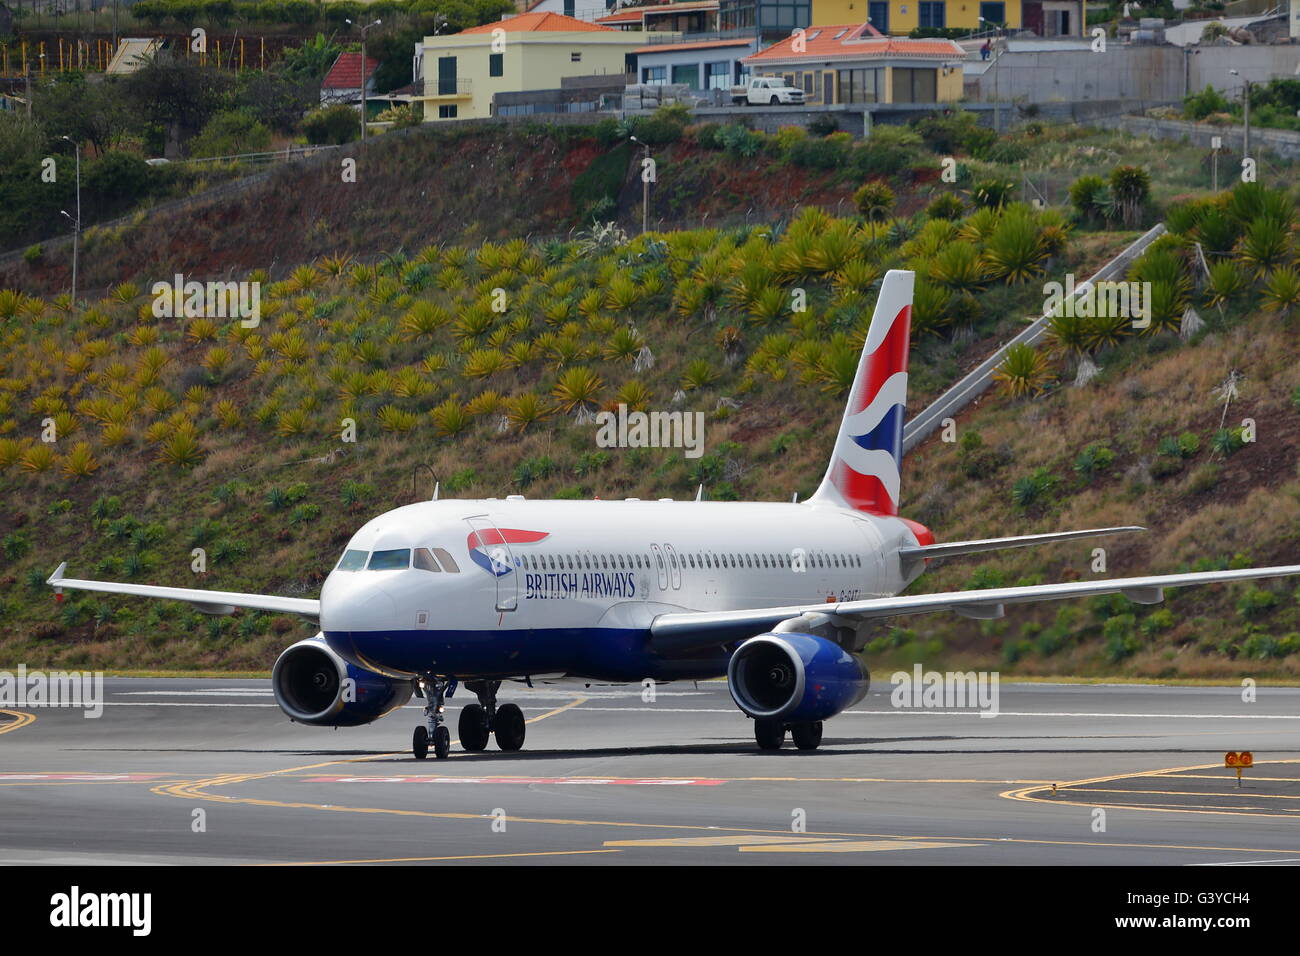 British Airways Airbus A320-200 G-GATJ arriving at Funchal Airport, Madeira, Portugal Stock Photo